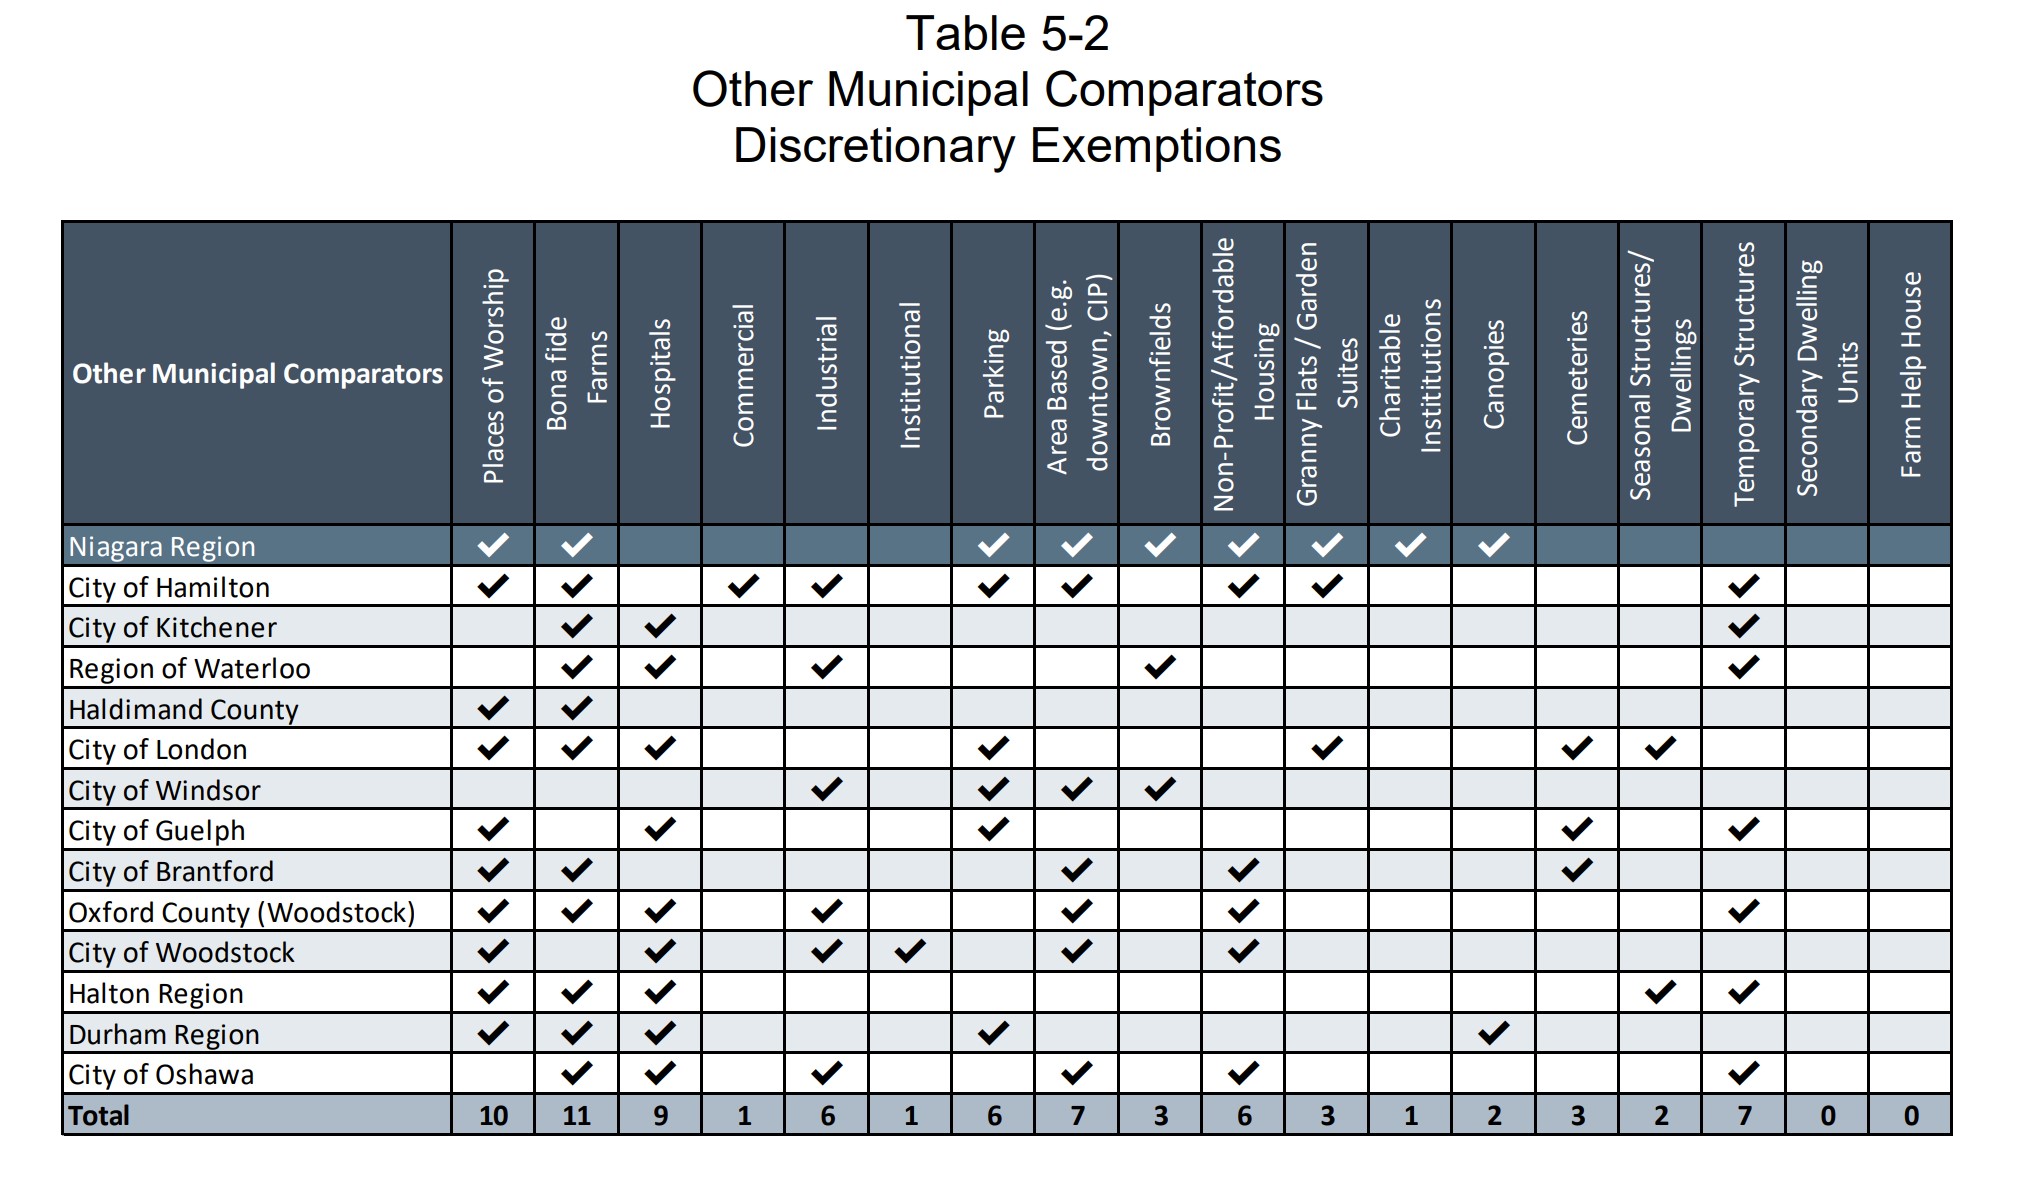 Table 5-2 Other Municipal Comparators - Discretionary Exemptions